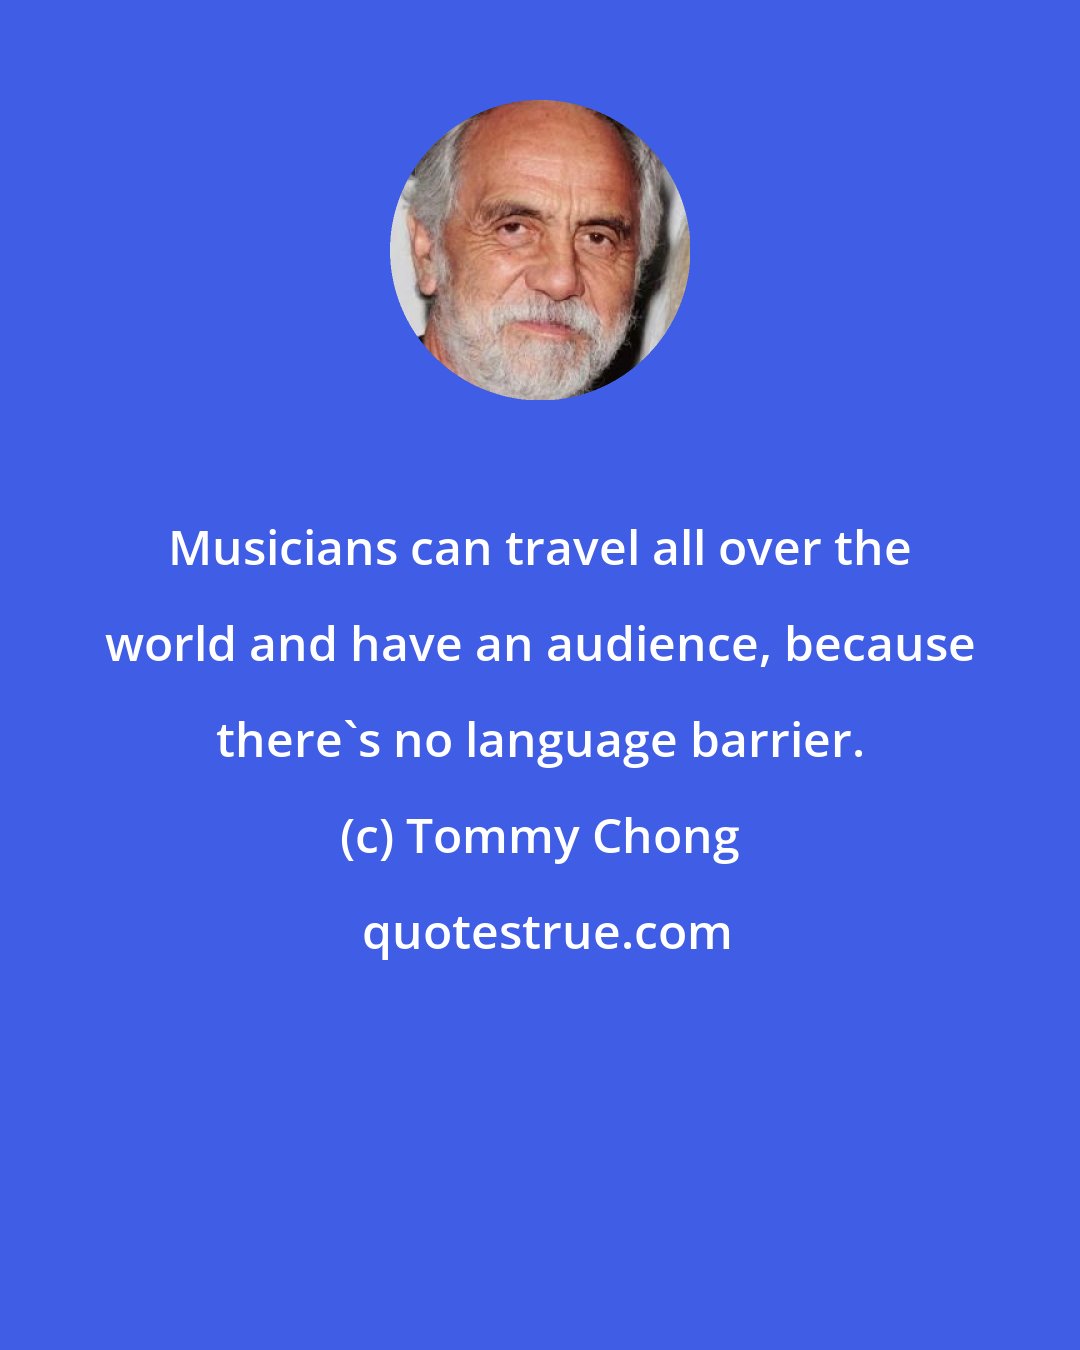 Tommy Chong: Musicians can travel all over the world and have an audience, because there's no language barrier.